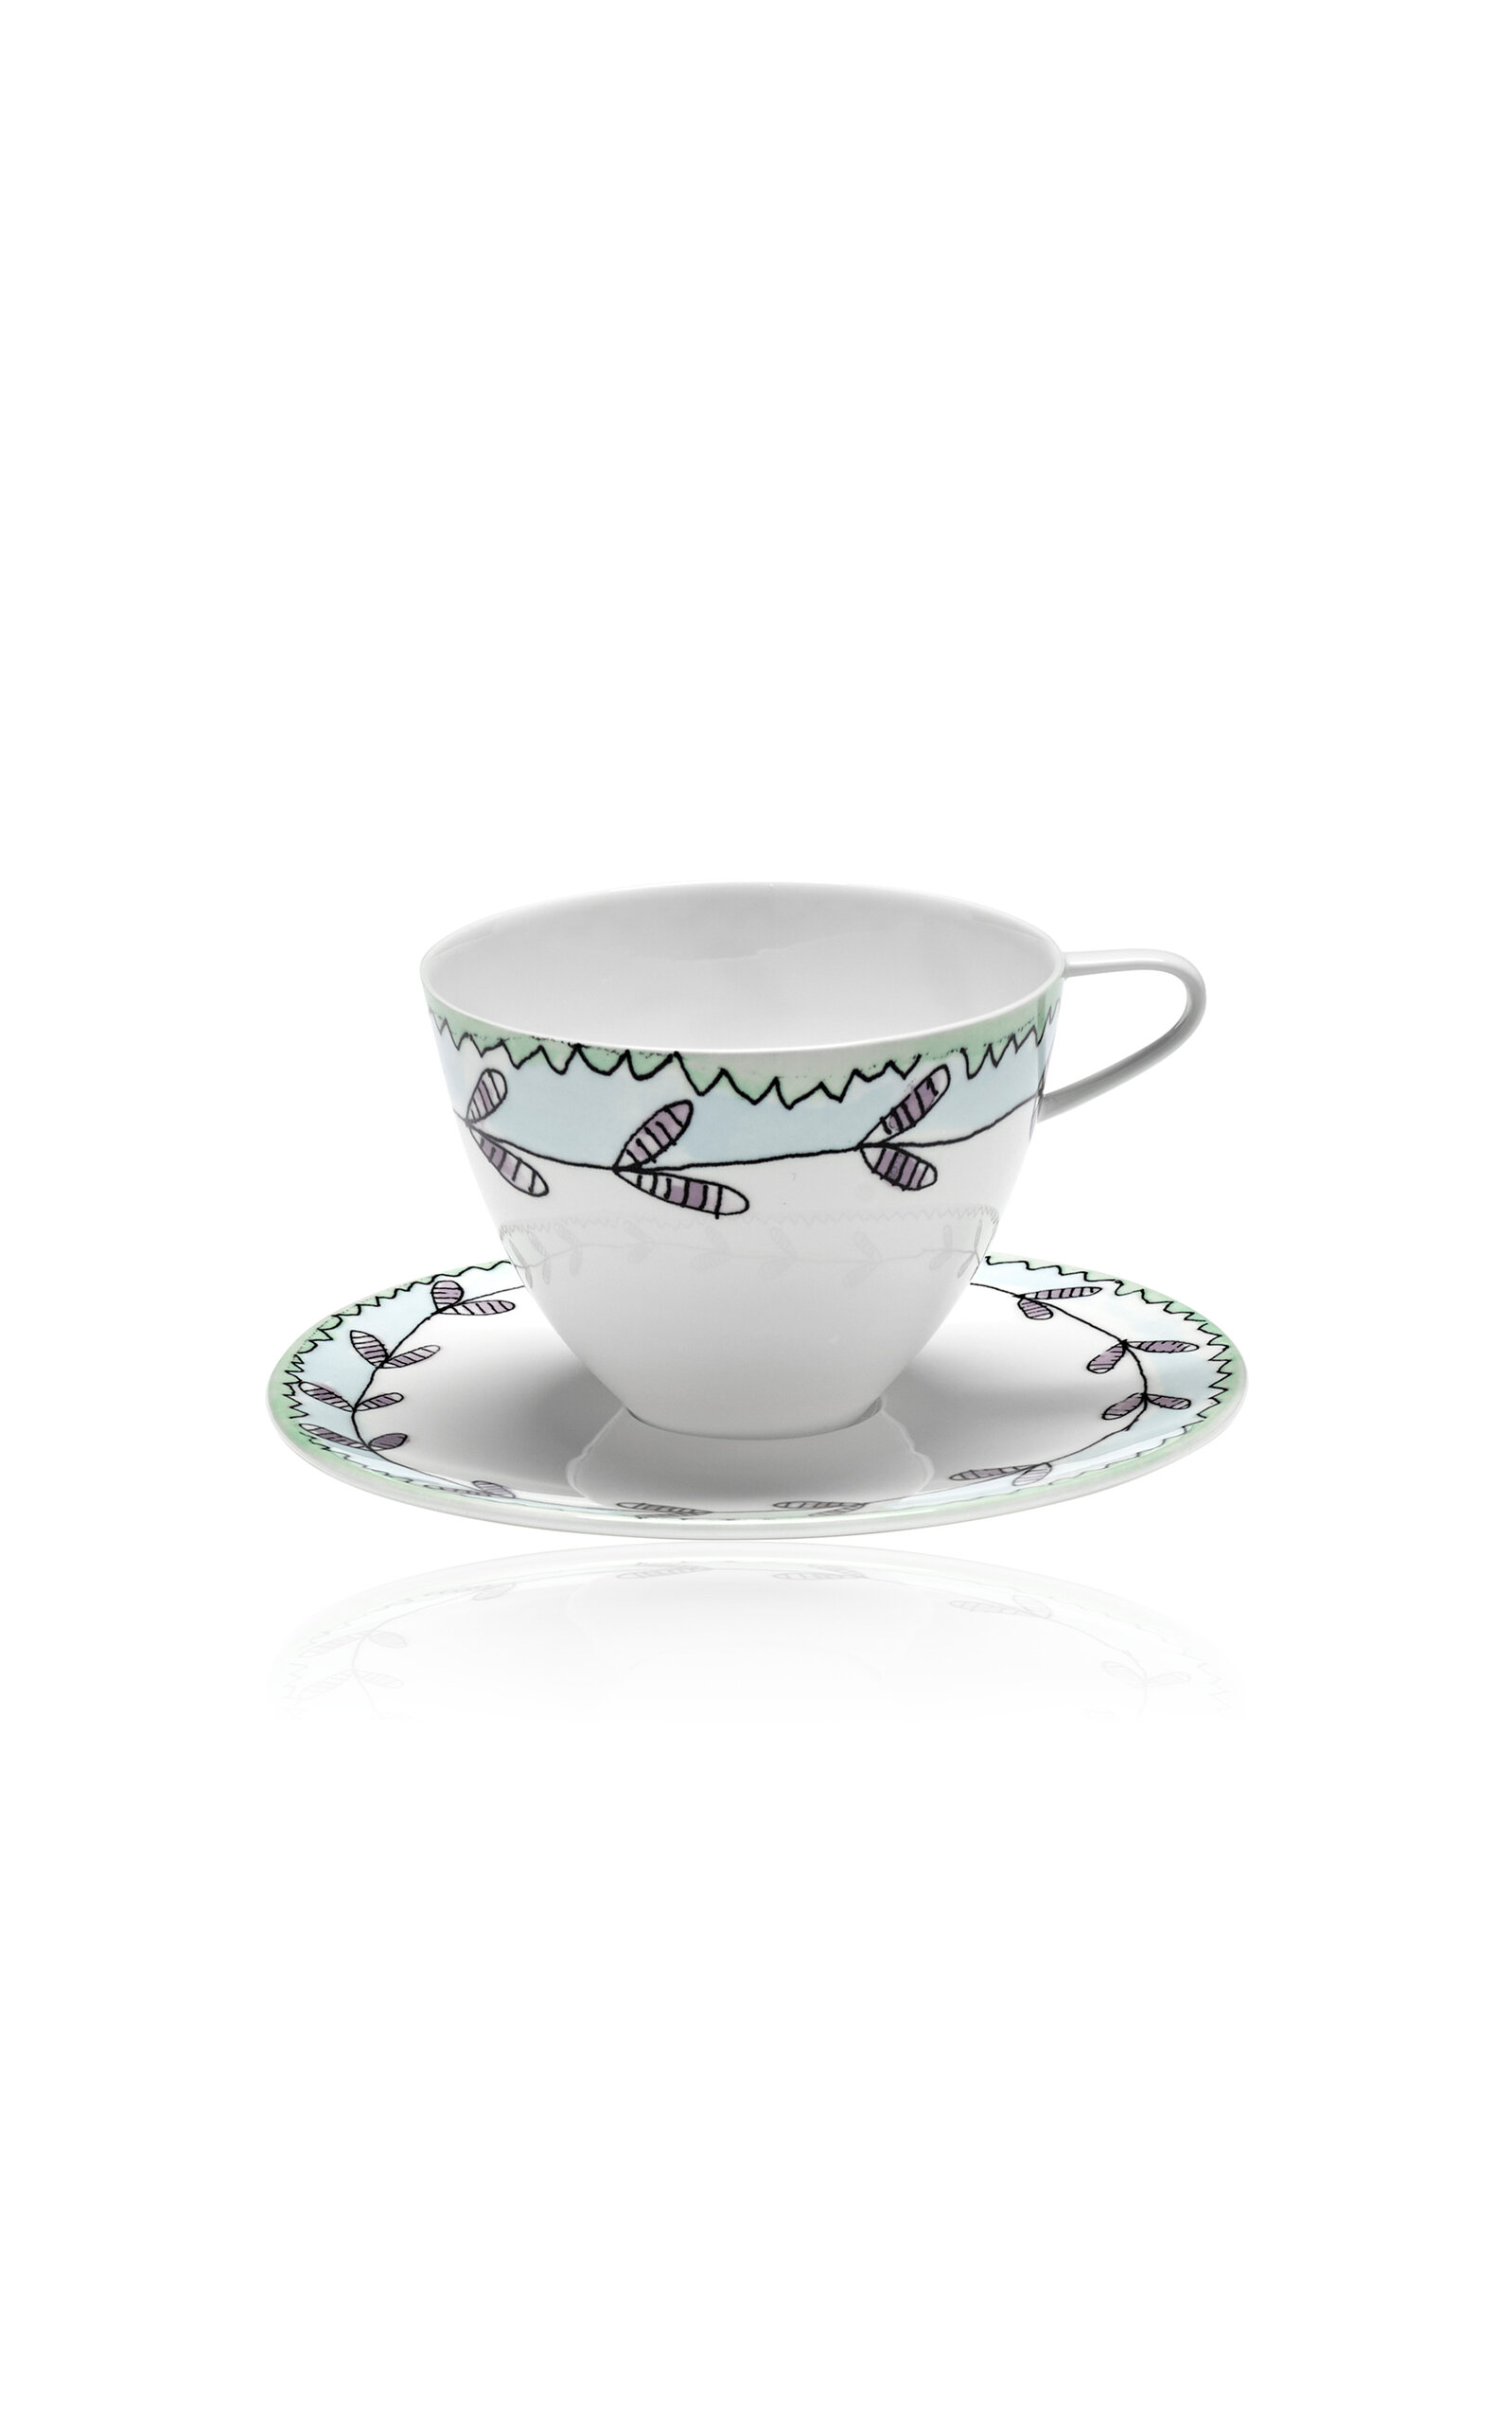 Marni For Serax Serax Marni Midnight Flowers Cappuchino Cup With Saucer D14.50cm Blossom Milk In White